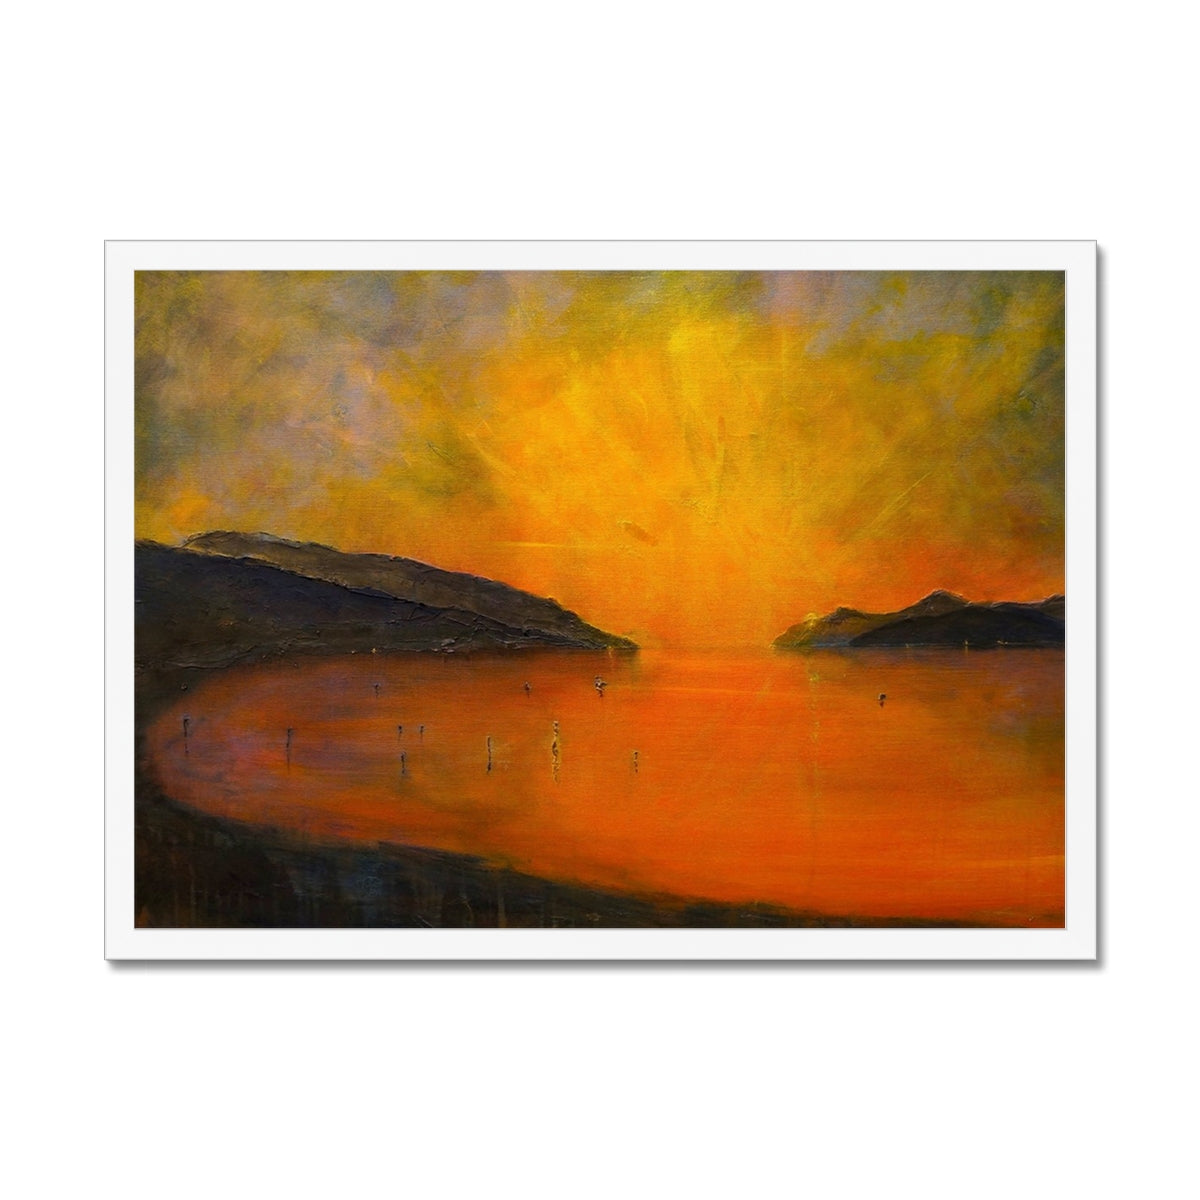 Loch Ness Sunset Painting | Framed Prints From Scotland-Framed Prints-Scottish Lochs & Mountains Art Gallery-A2 Landscape-White Frame-Paintings, Prints, Homeware, Art Gifts From Scotland By Scottish Artist Kevin Hunter